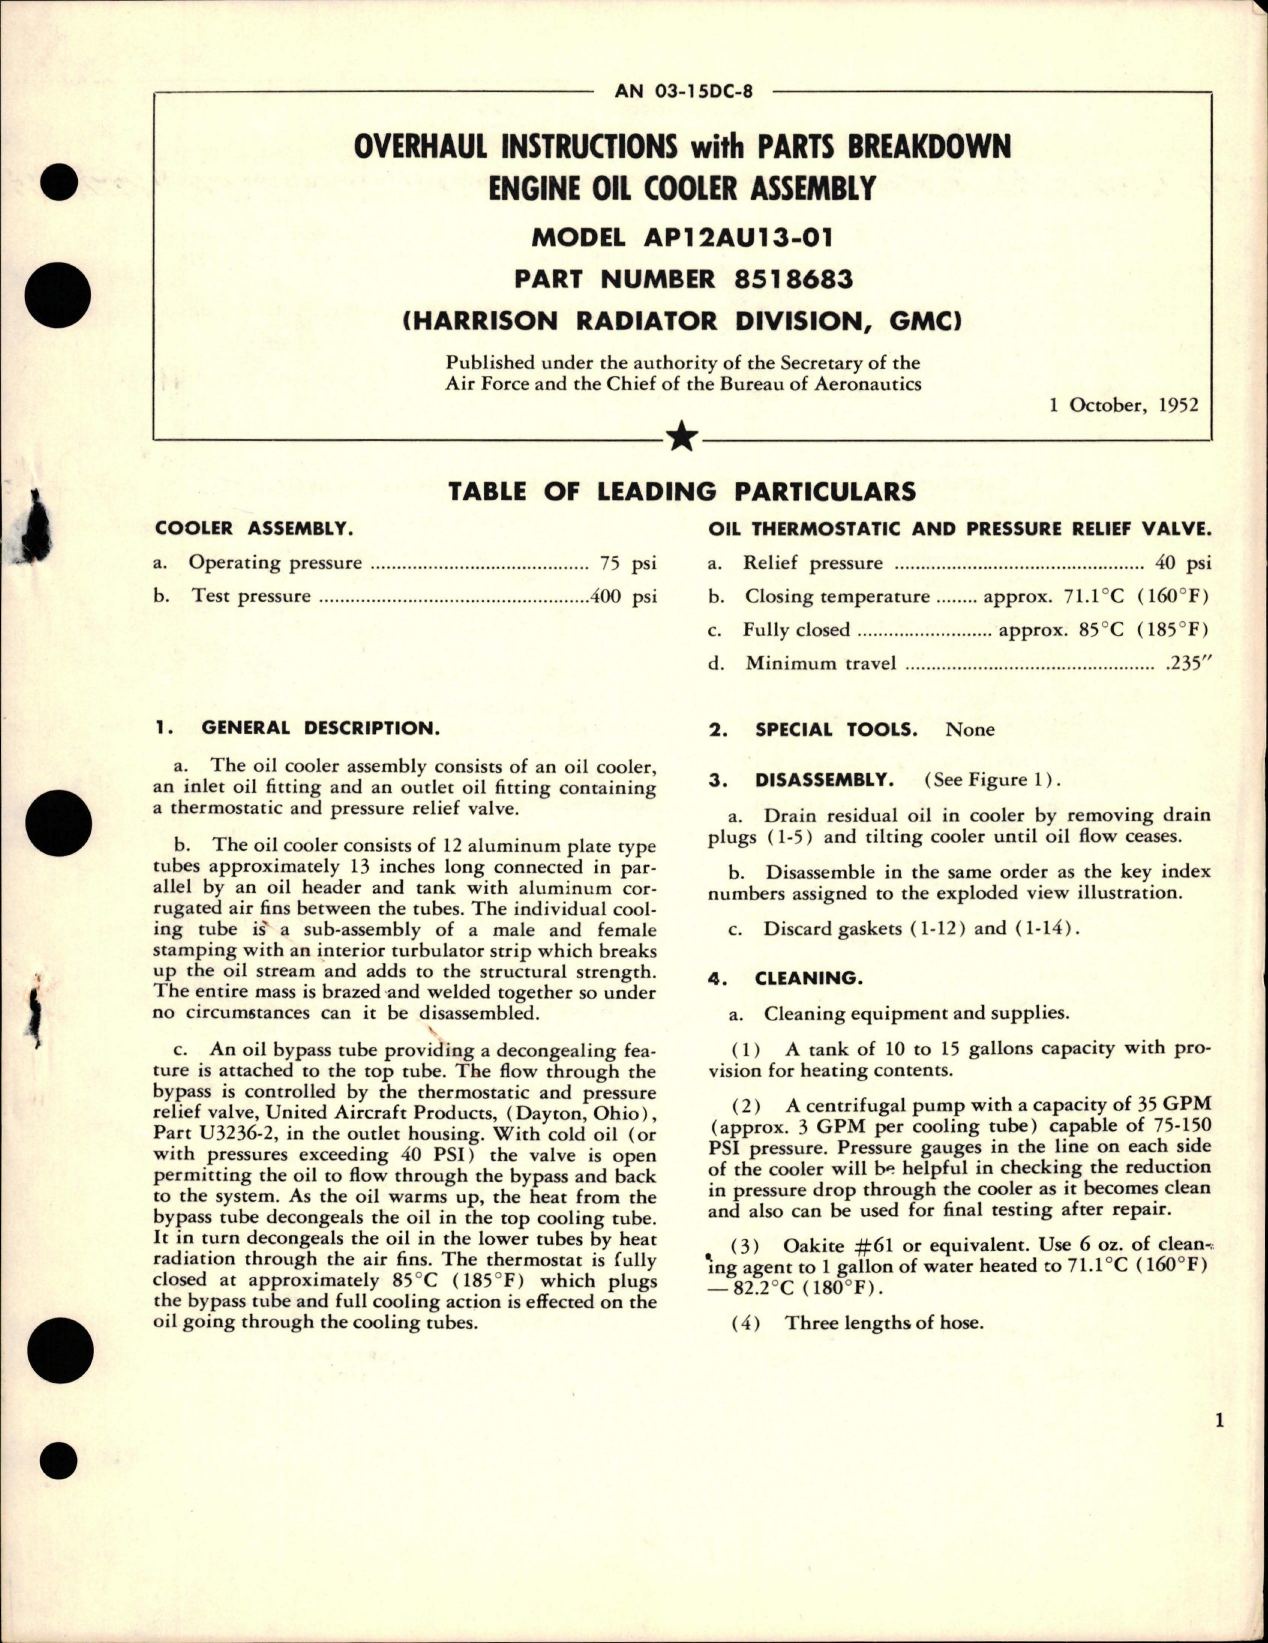 Sample page 1 from AirCorps Library document: Overhaul Instructions with Parts for Engine Oil Cooler Assembly - Model AP12AU13-01 - Part 8518683